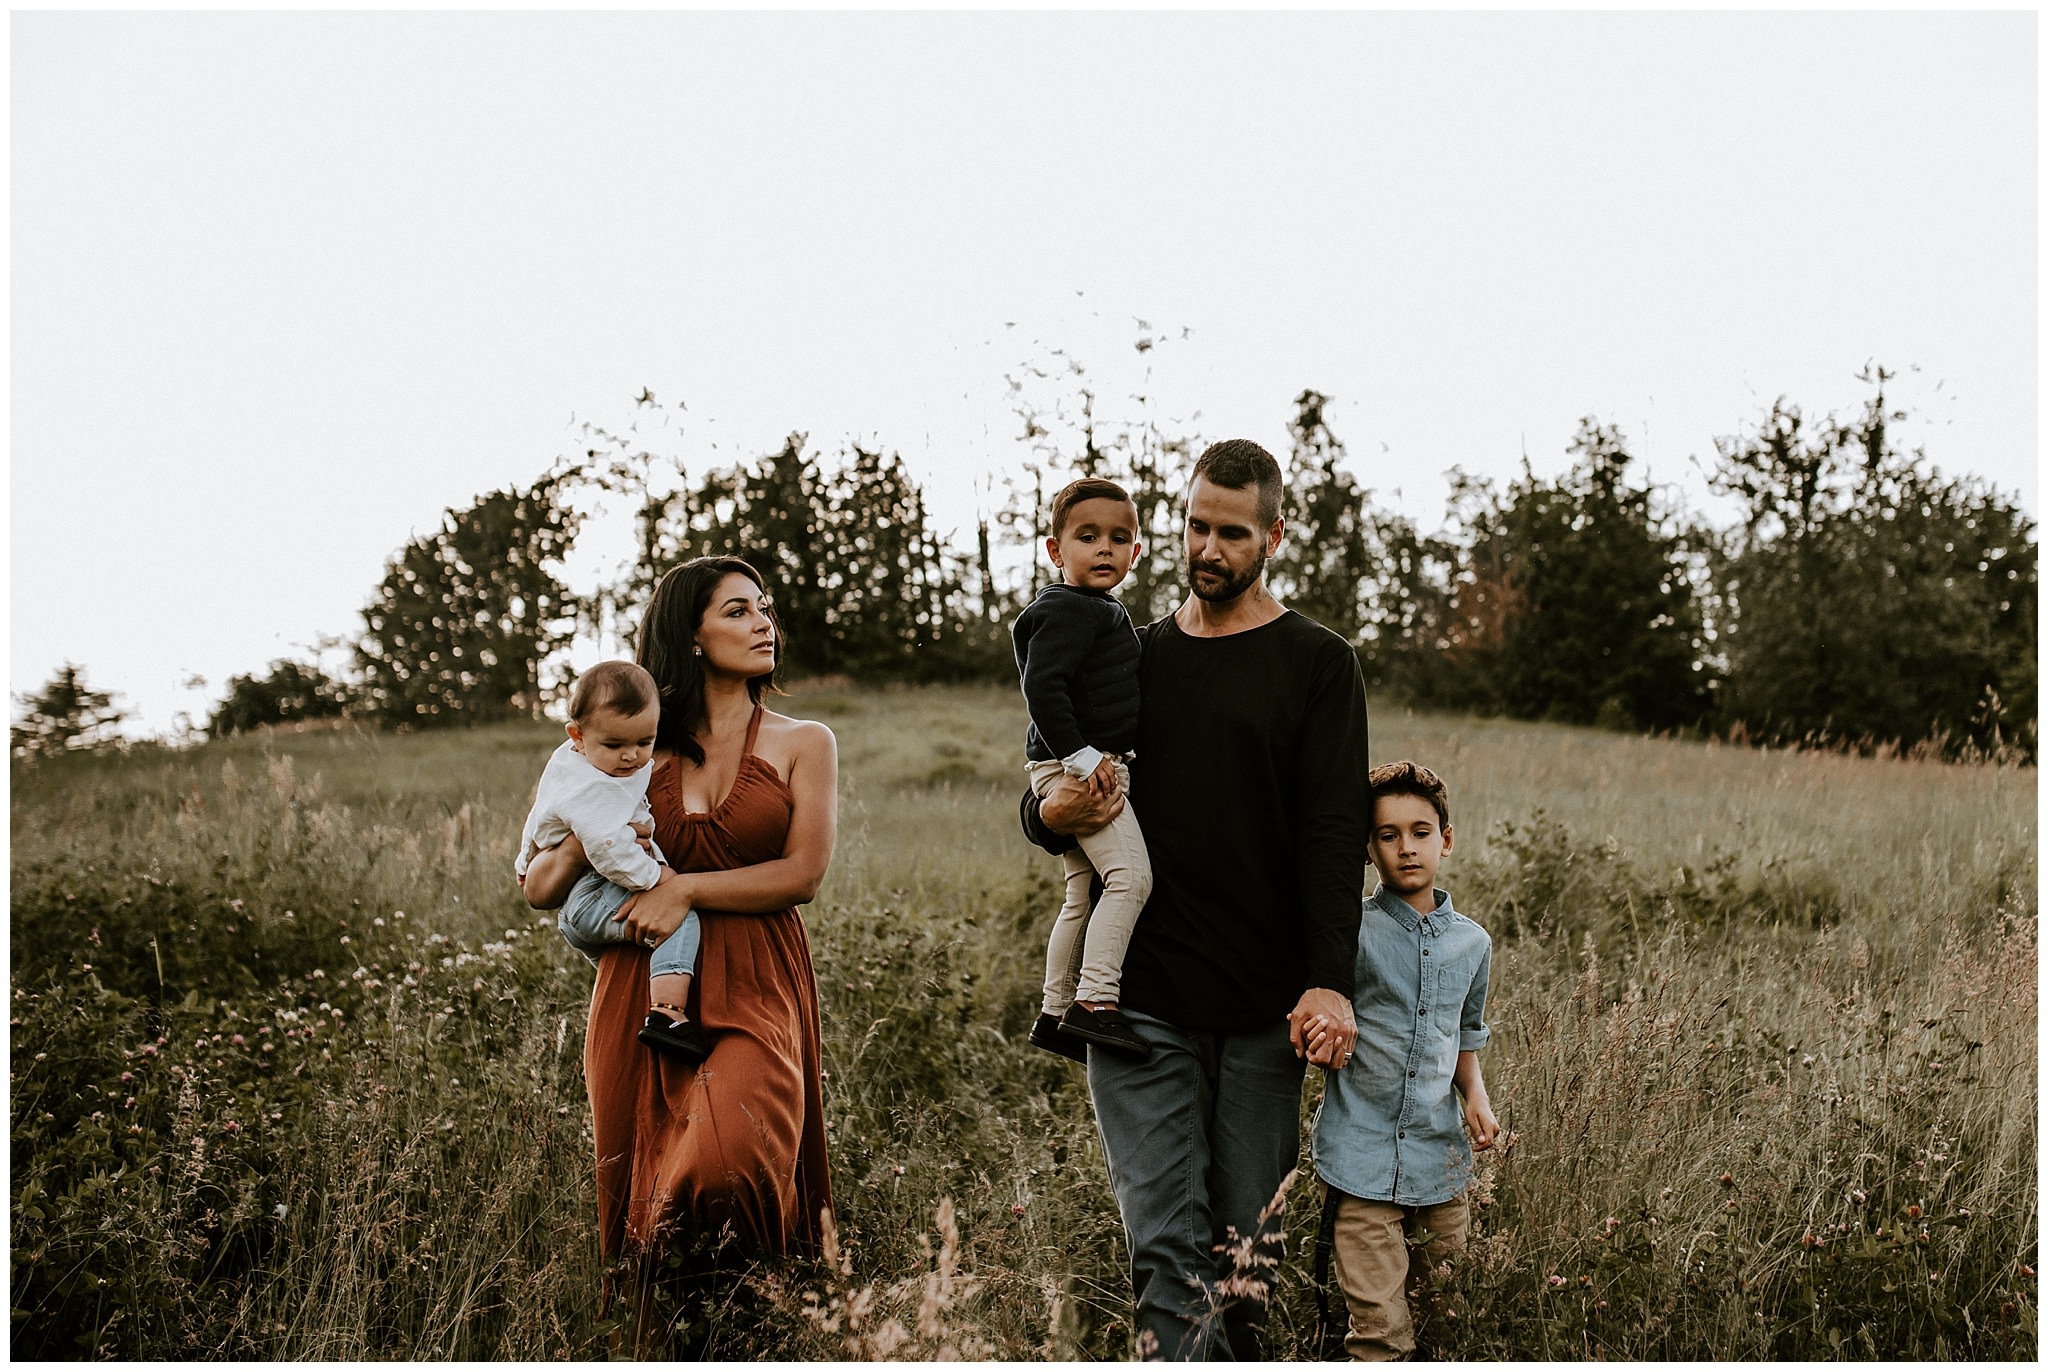 Vancouver family photos in golden light and tall grassy field 